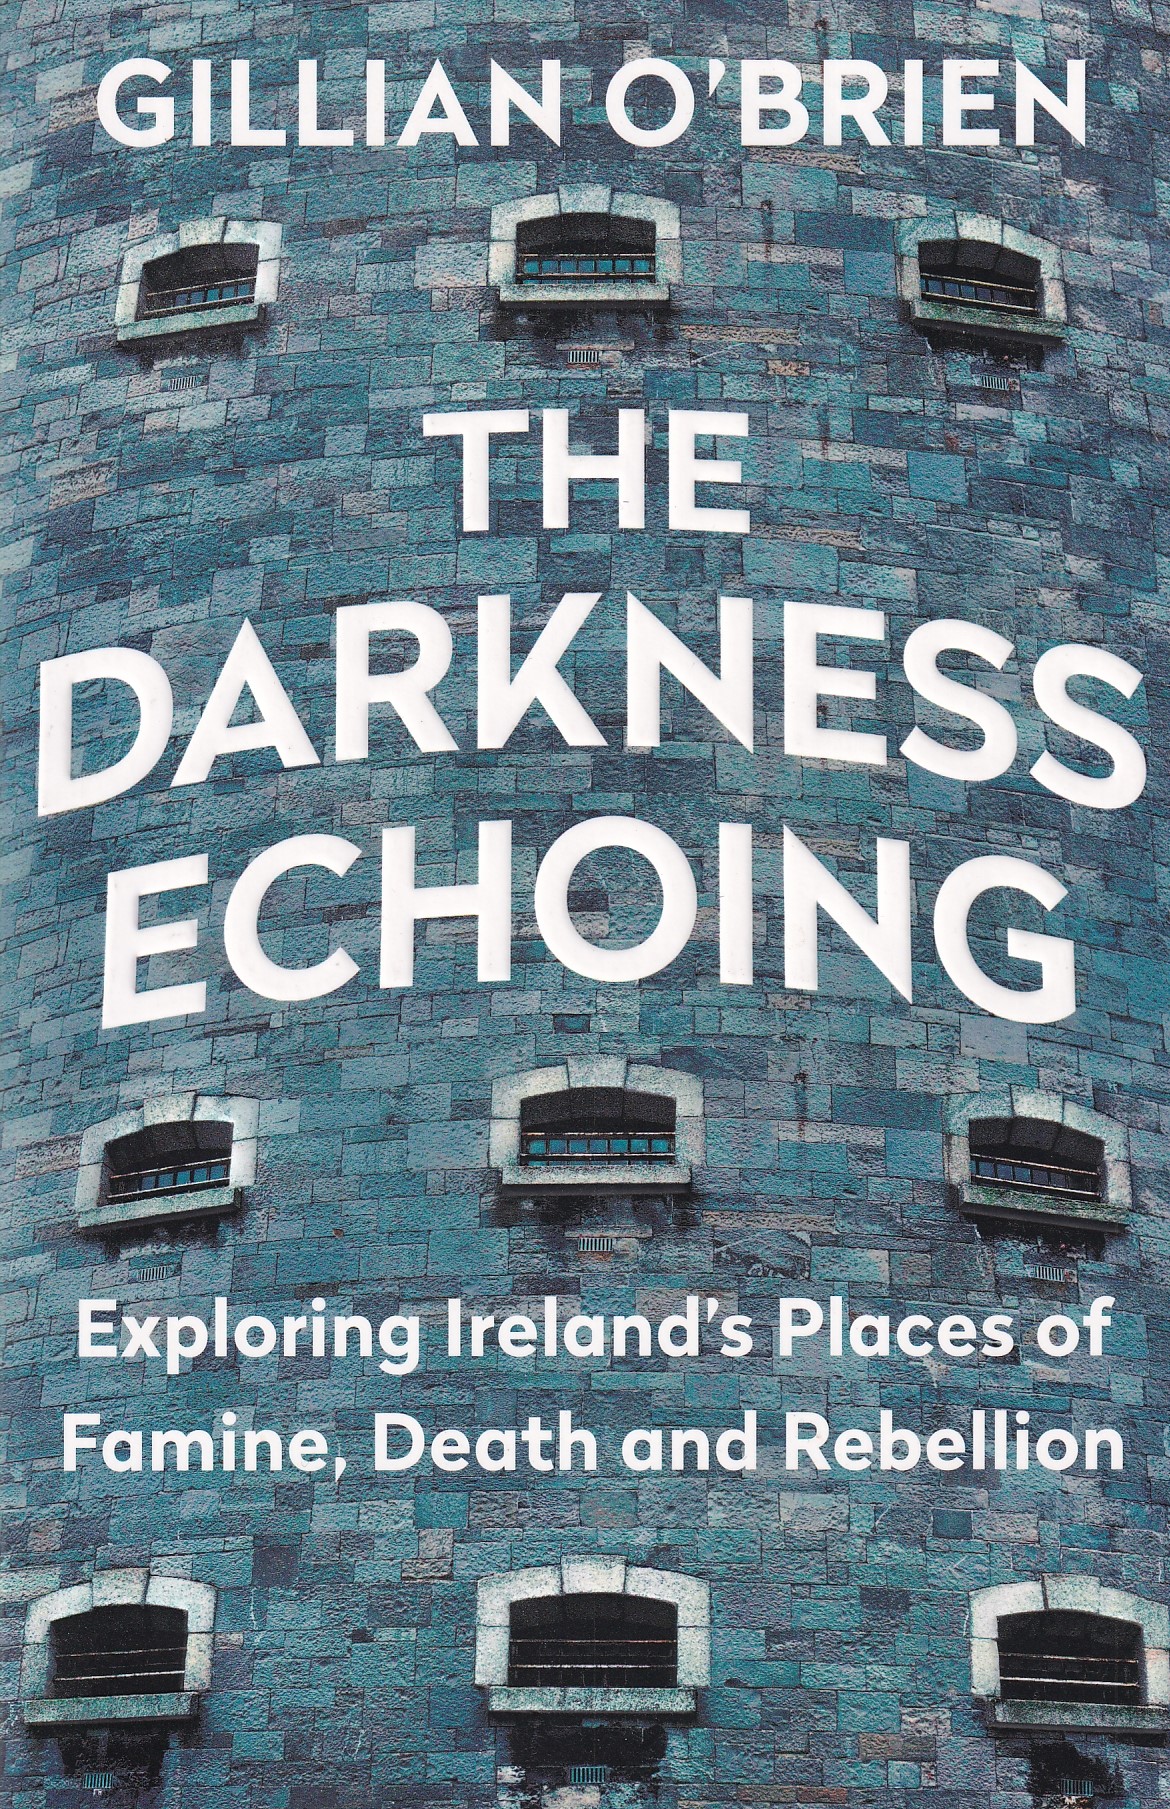 The Darkness Echoing: Exploring Ireland’s Places of Famine, Death and Rebellion [Signed] by Gillian O'Brien